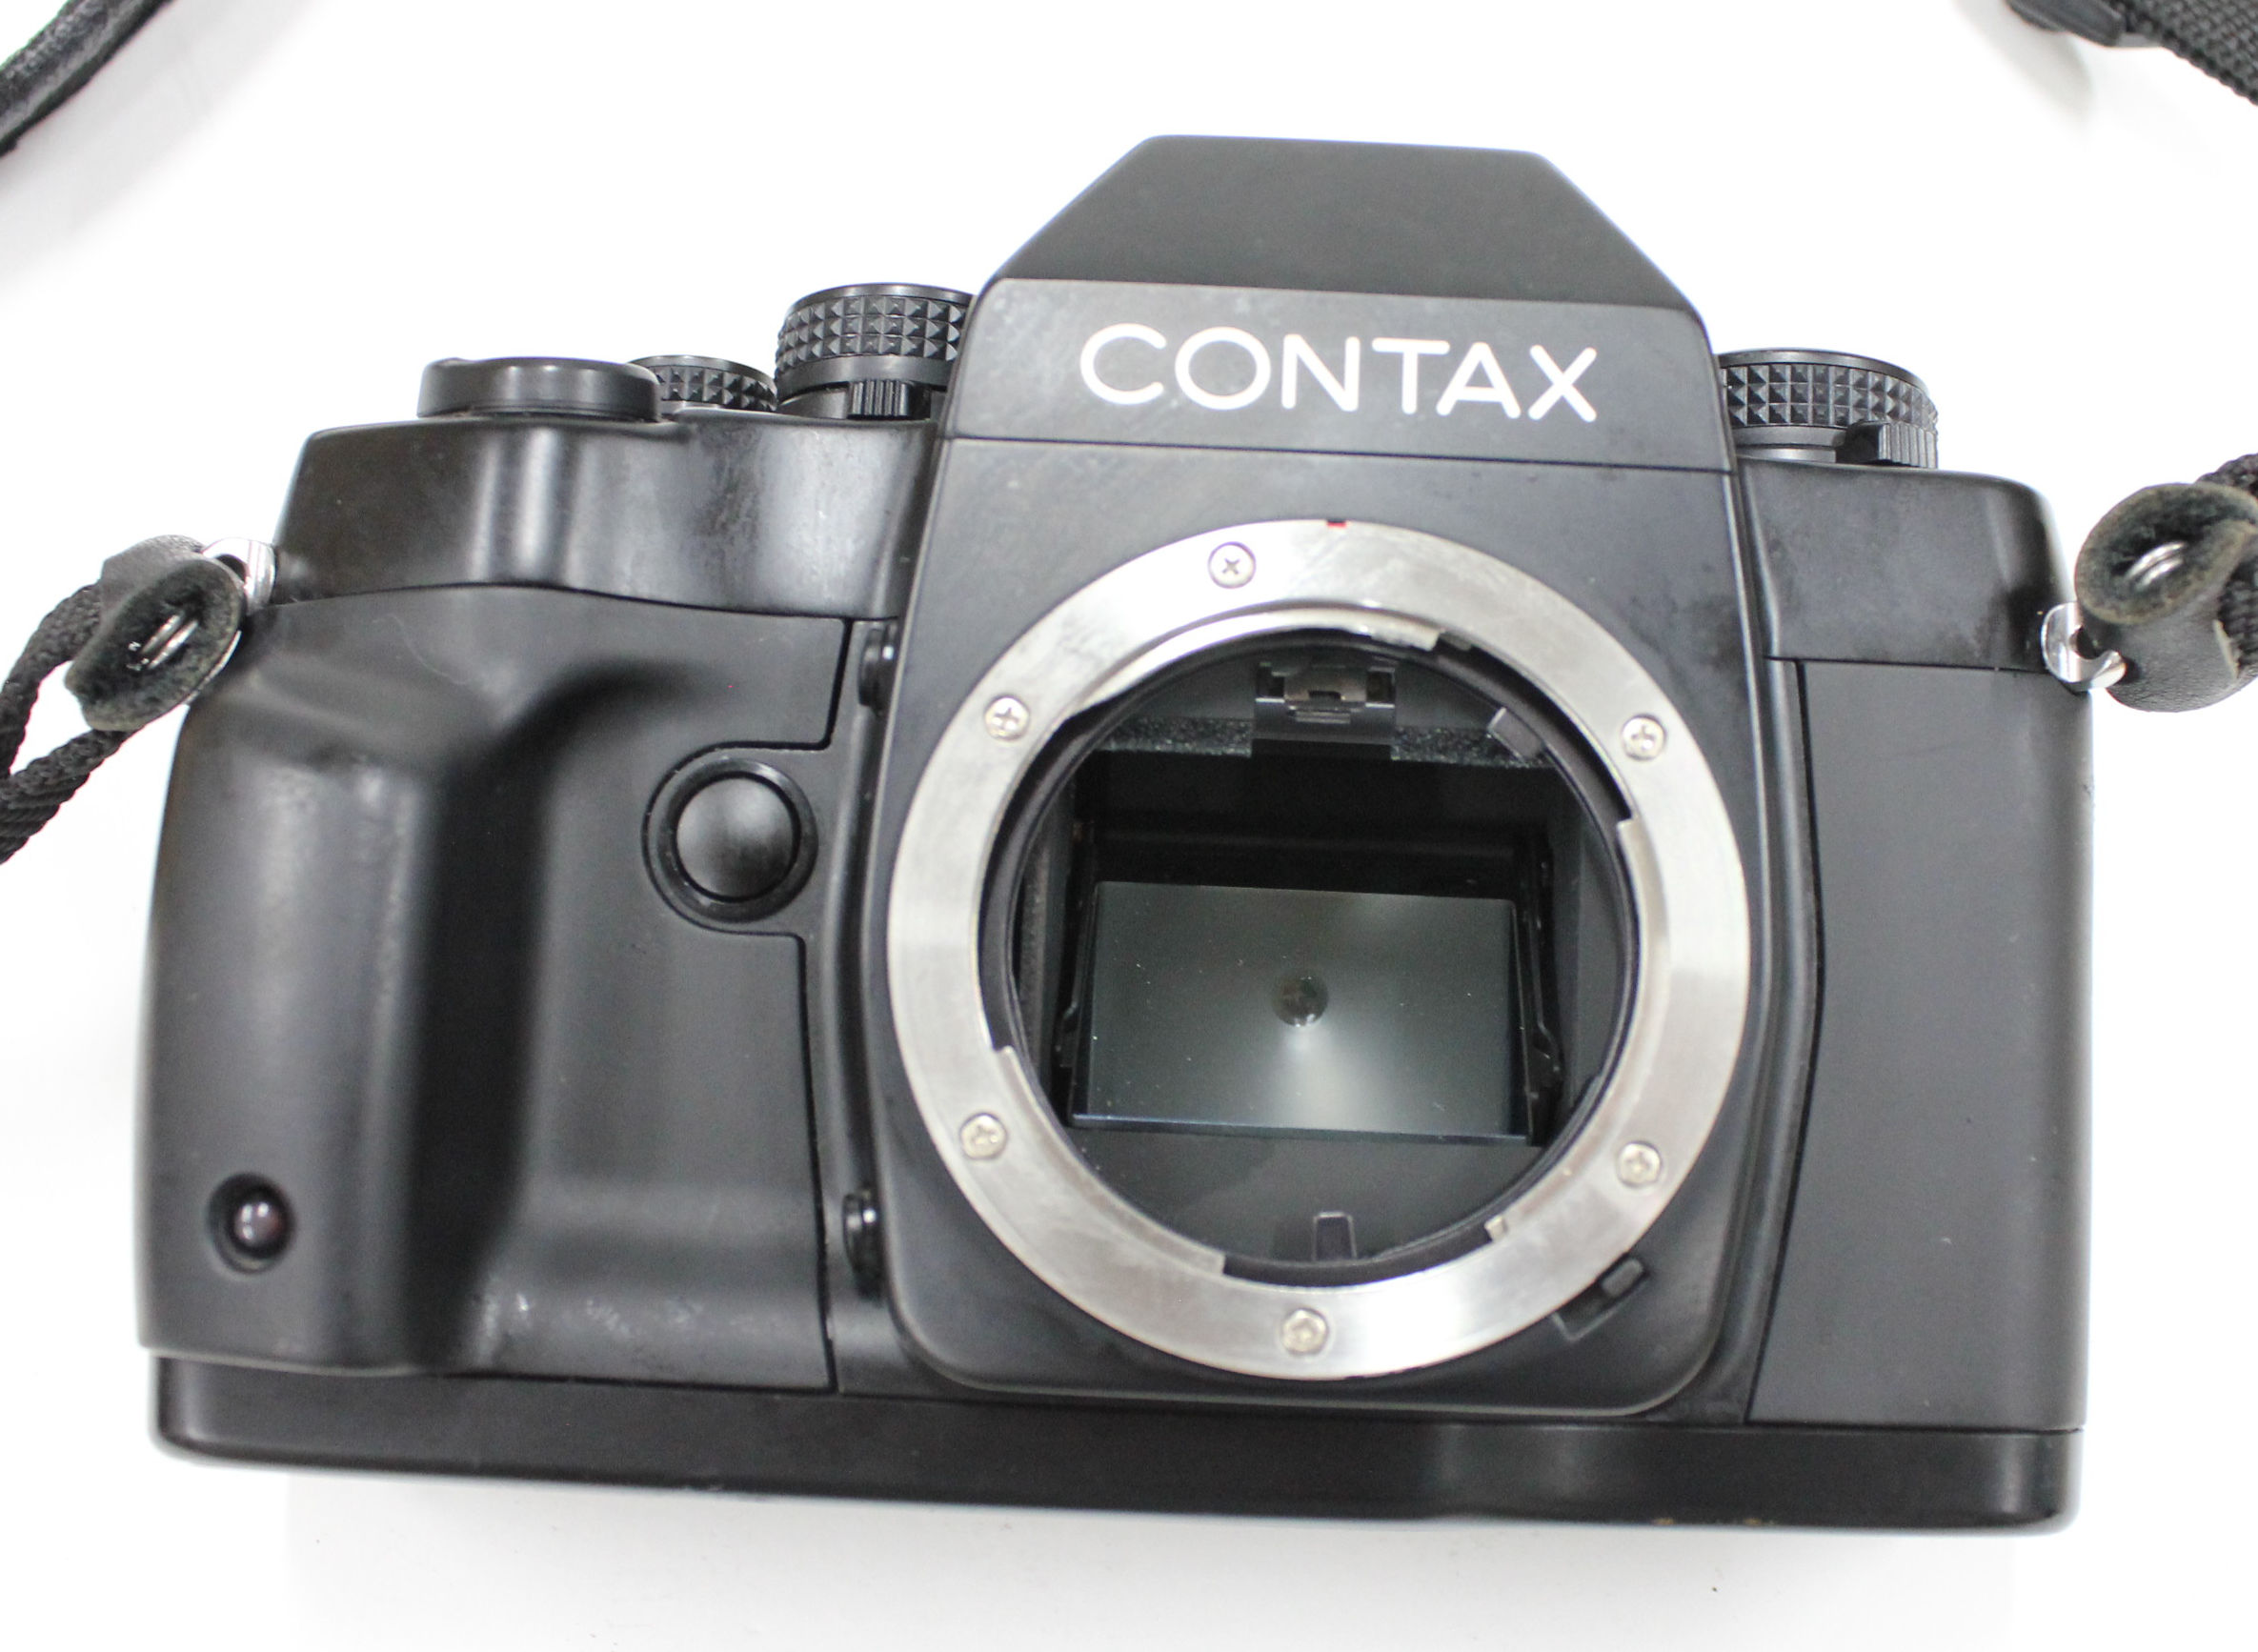  Contax RX 35mm SLR Film Camera Black Body from Japan Photo 2